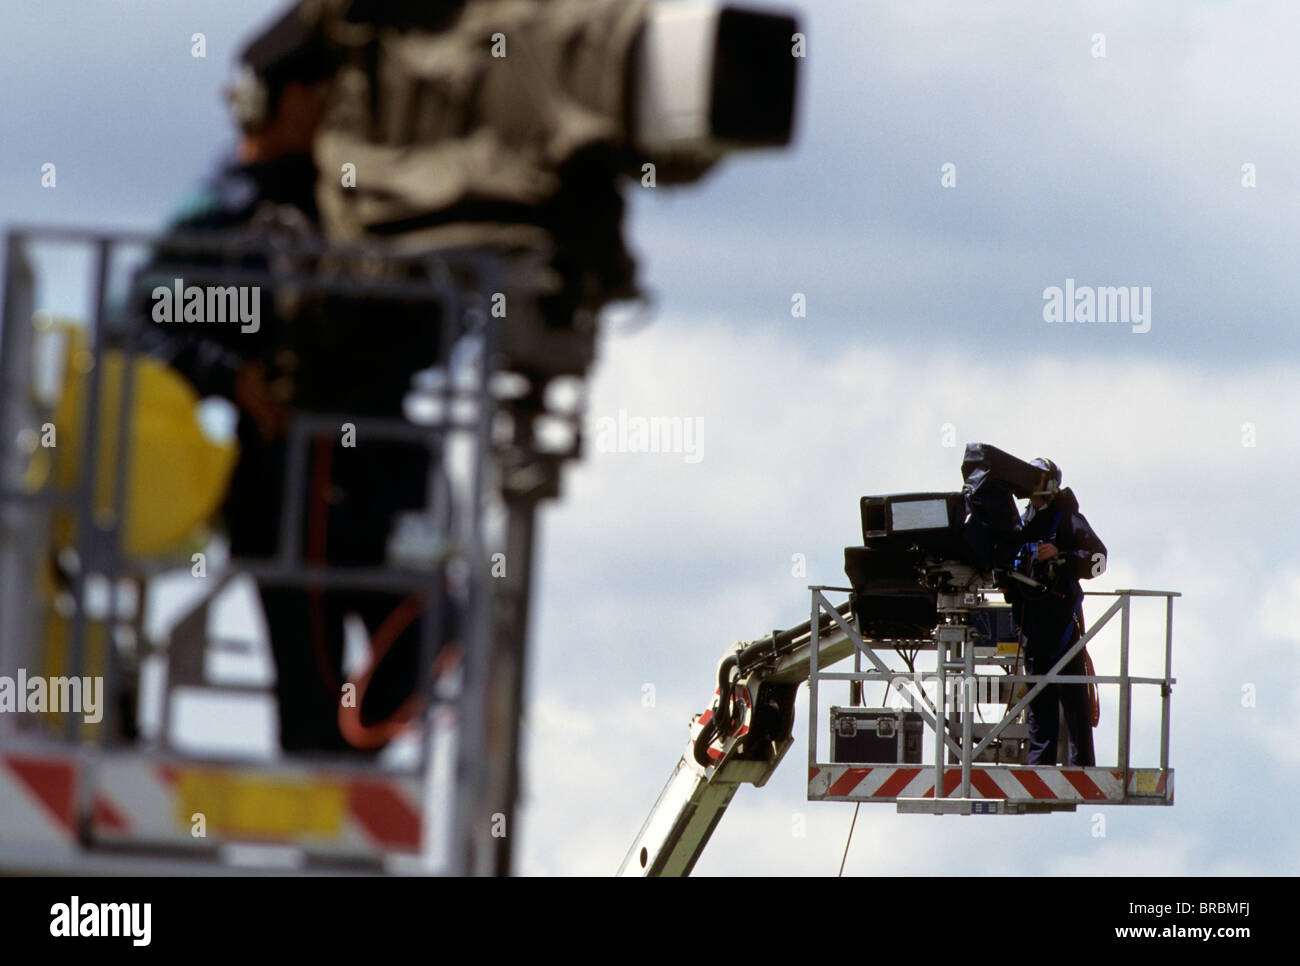 Camera cres on gantries at a sports event Stock Photo